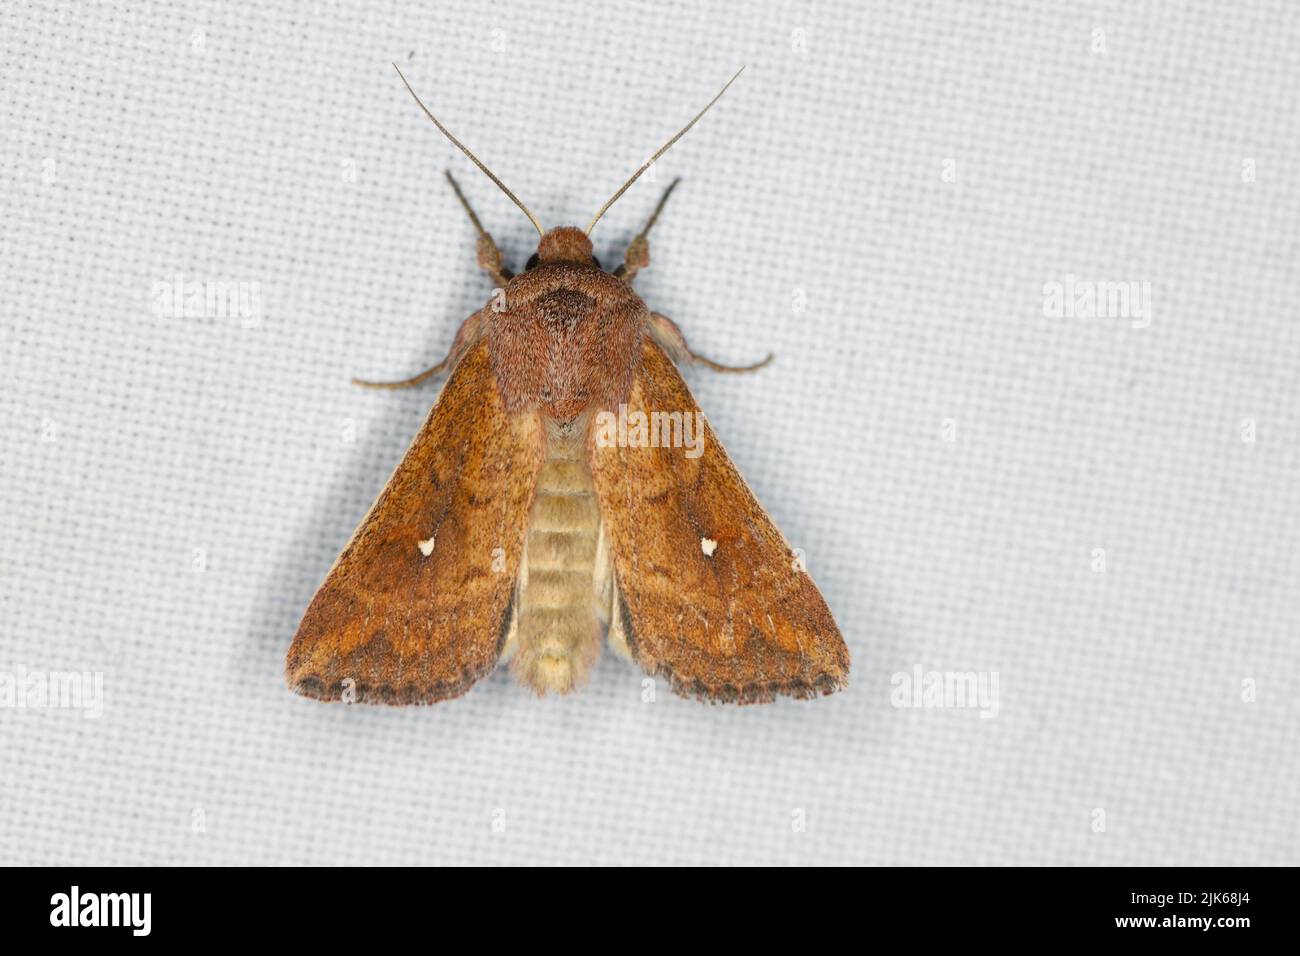 White-Point Moth, Mythimna albipuncta, an insect lured by the light. Stock Photo